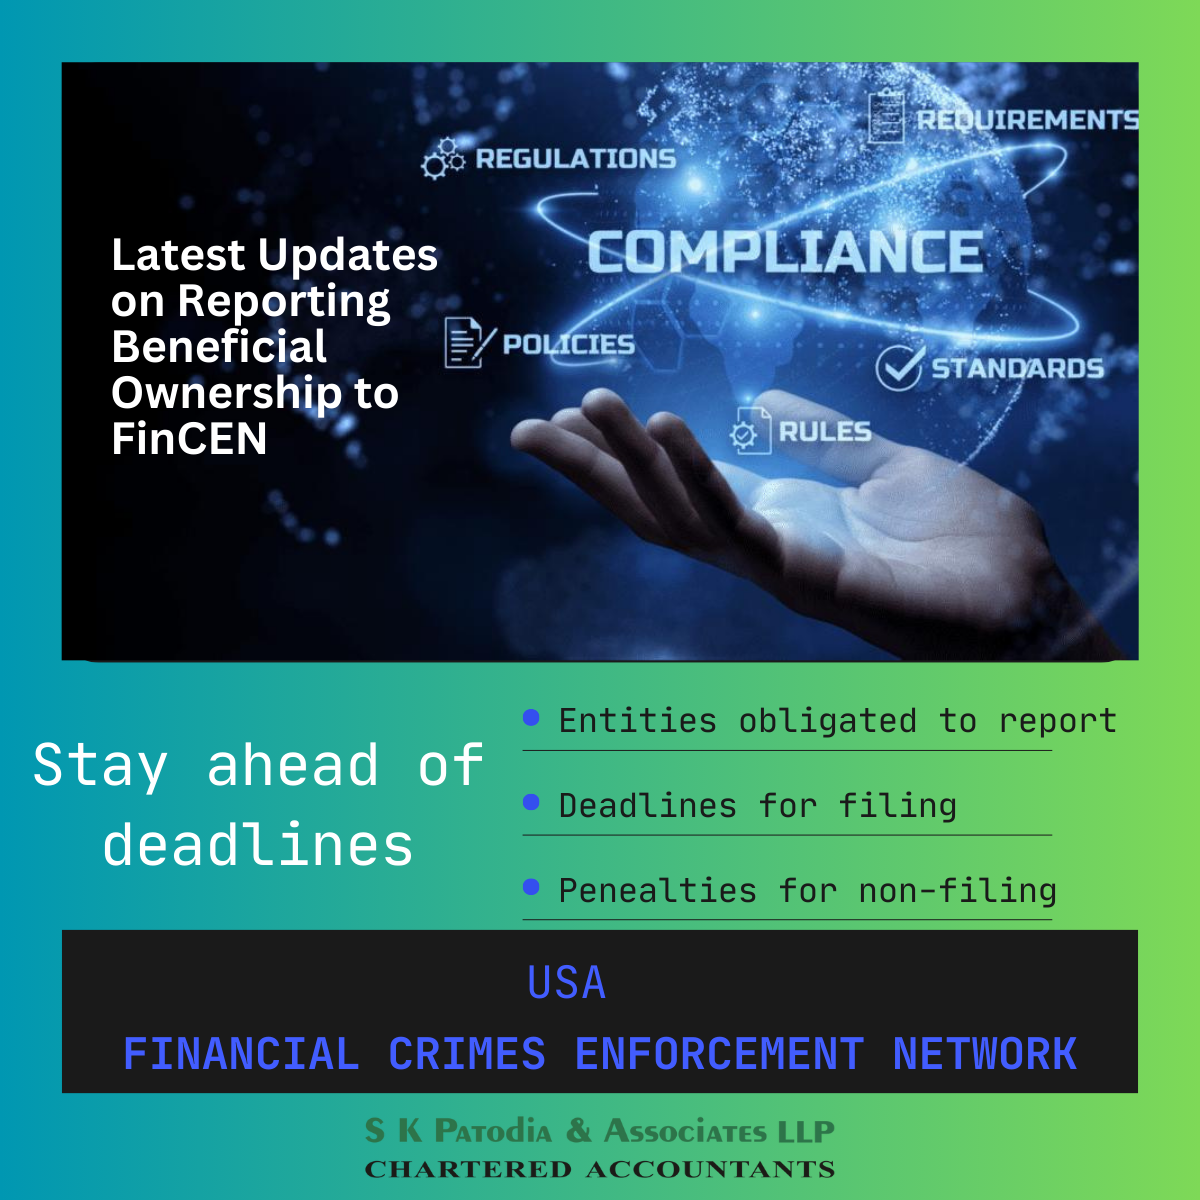 Latest Updates for Reporting Beneficial Owners to FinCEN in the USA